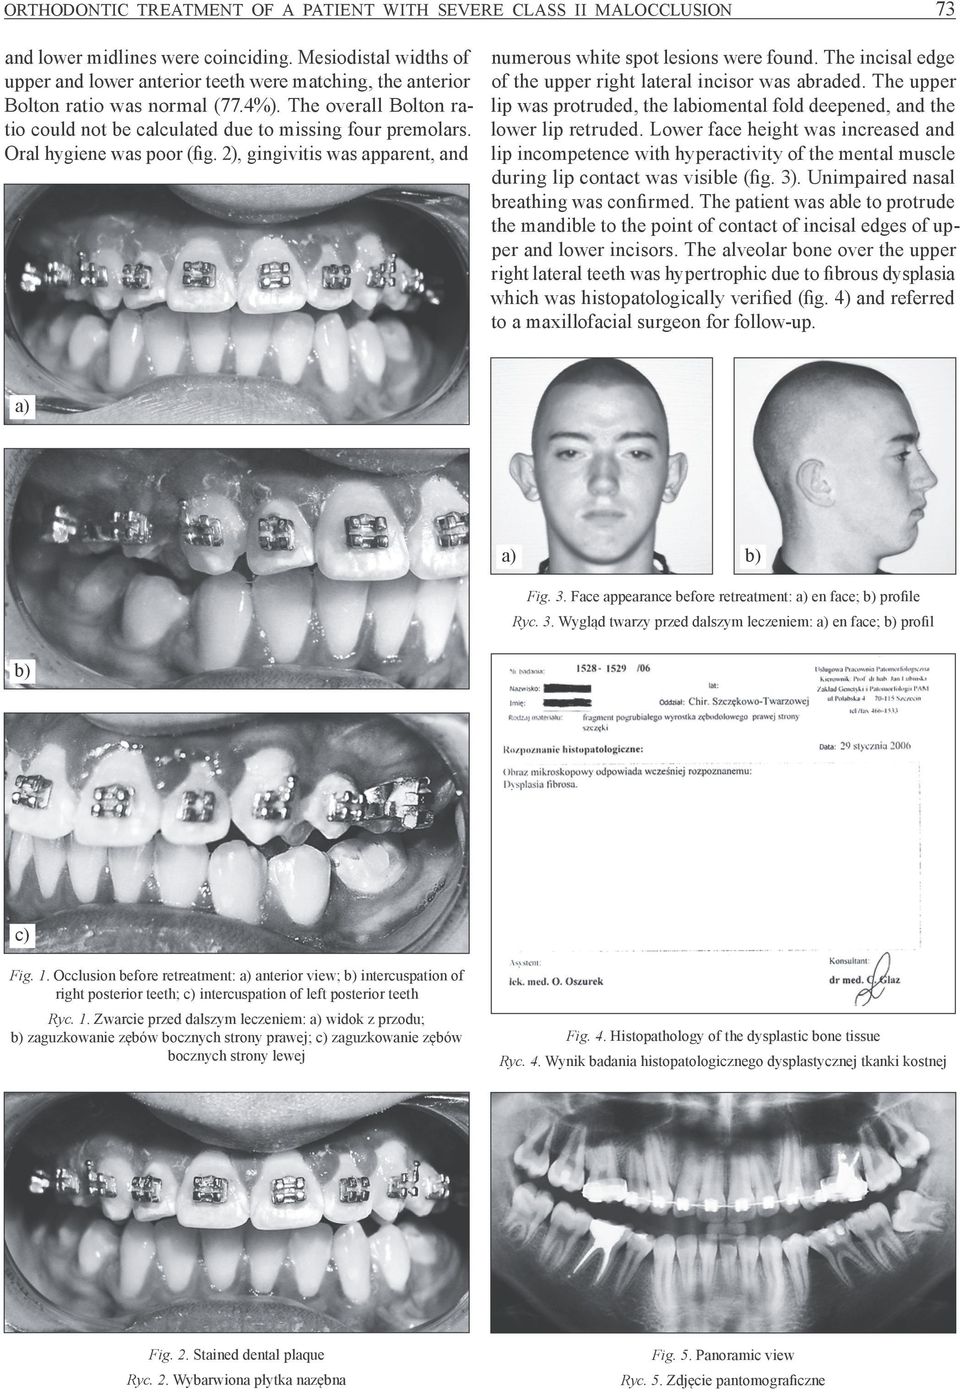 Oral hygiene was poor (fig. 2), gingivitis was apparent, and numerous white spot lesions were found. The incisal edge of the upper right lateral incisor was abraded.